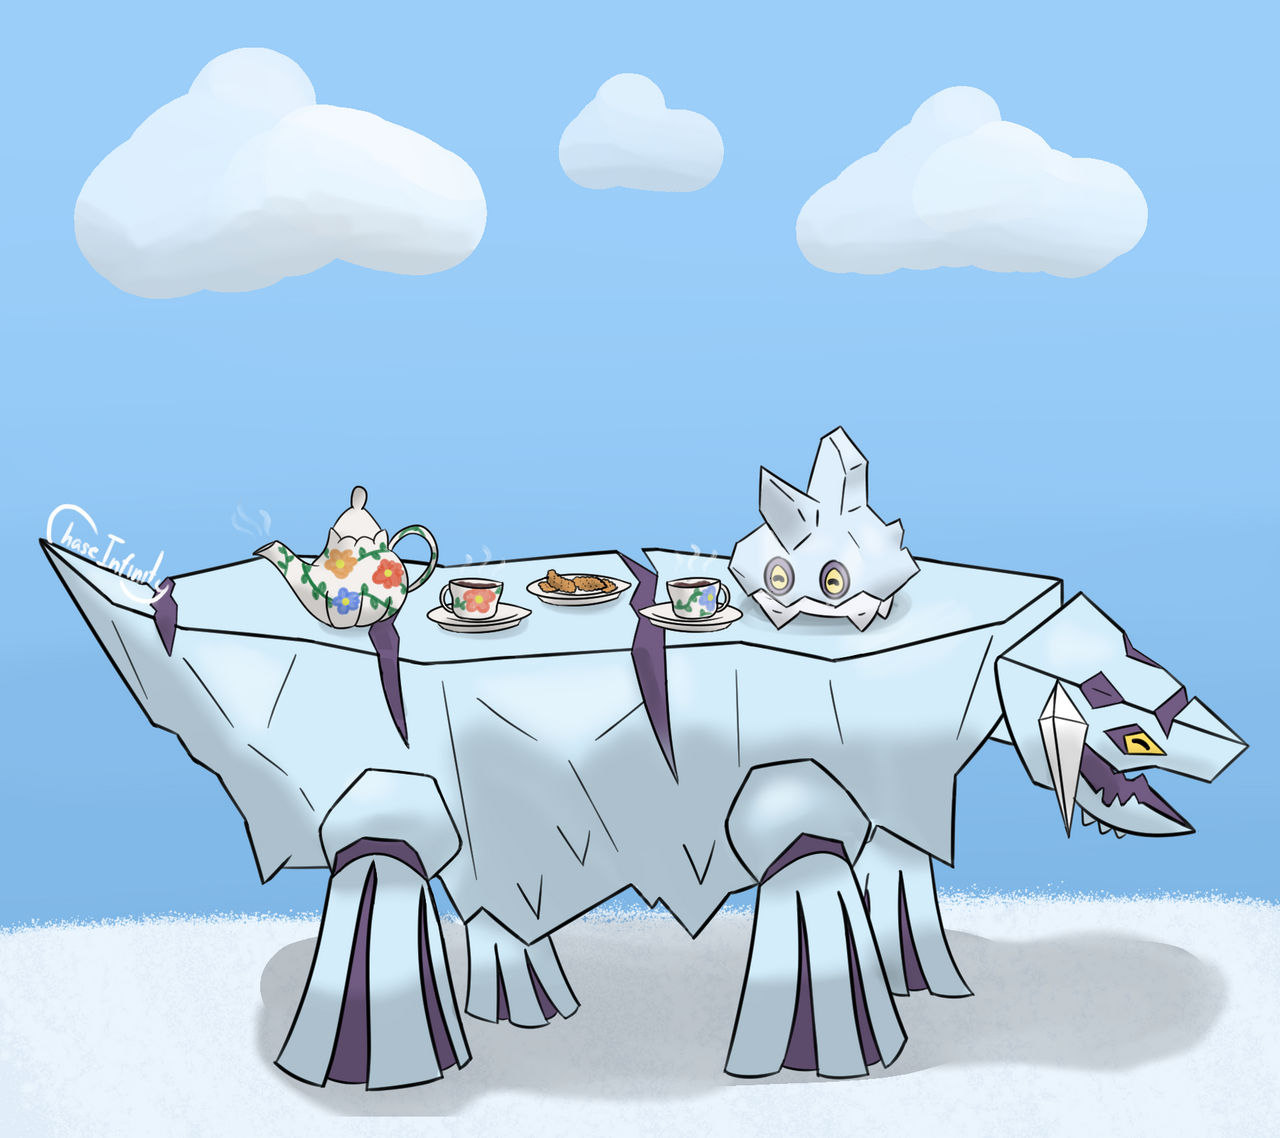 tea_time_with_burgmite_and_avalugg_by_chaseinfinity_ddddt83-fullview.jpg